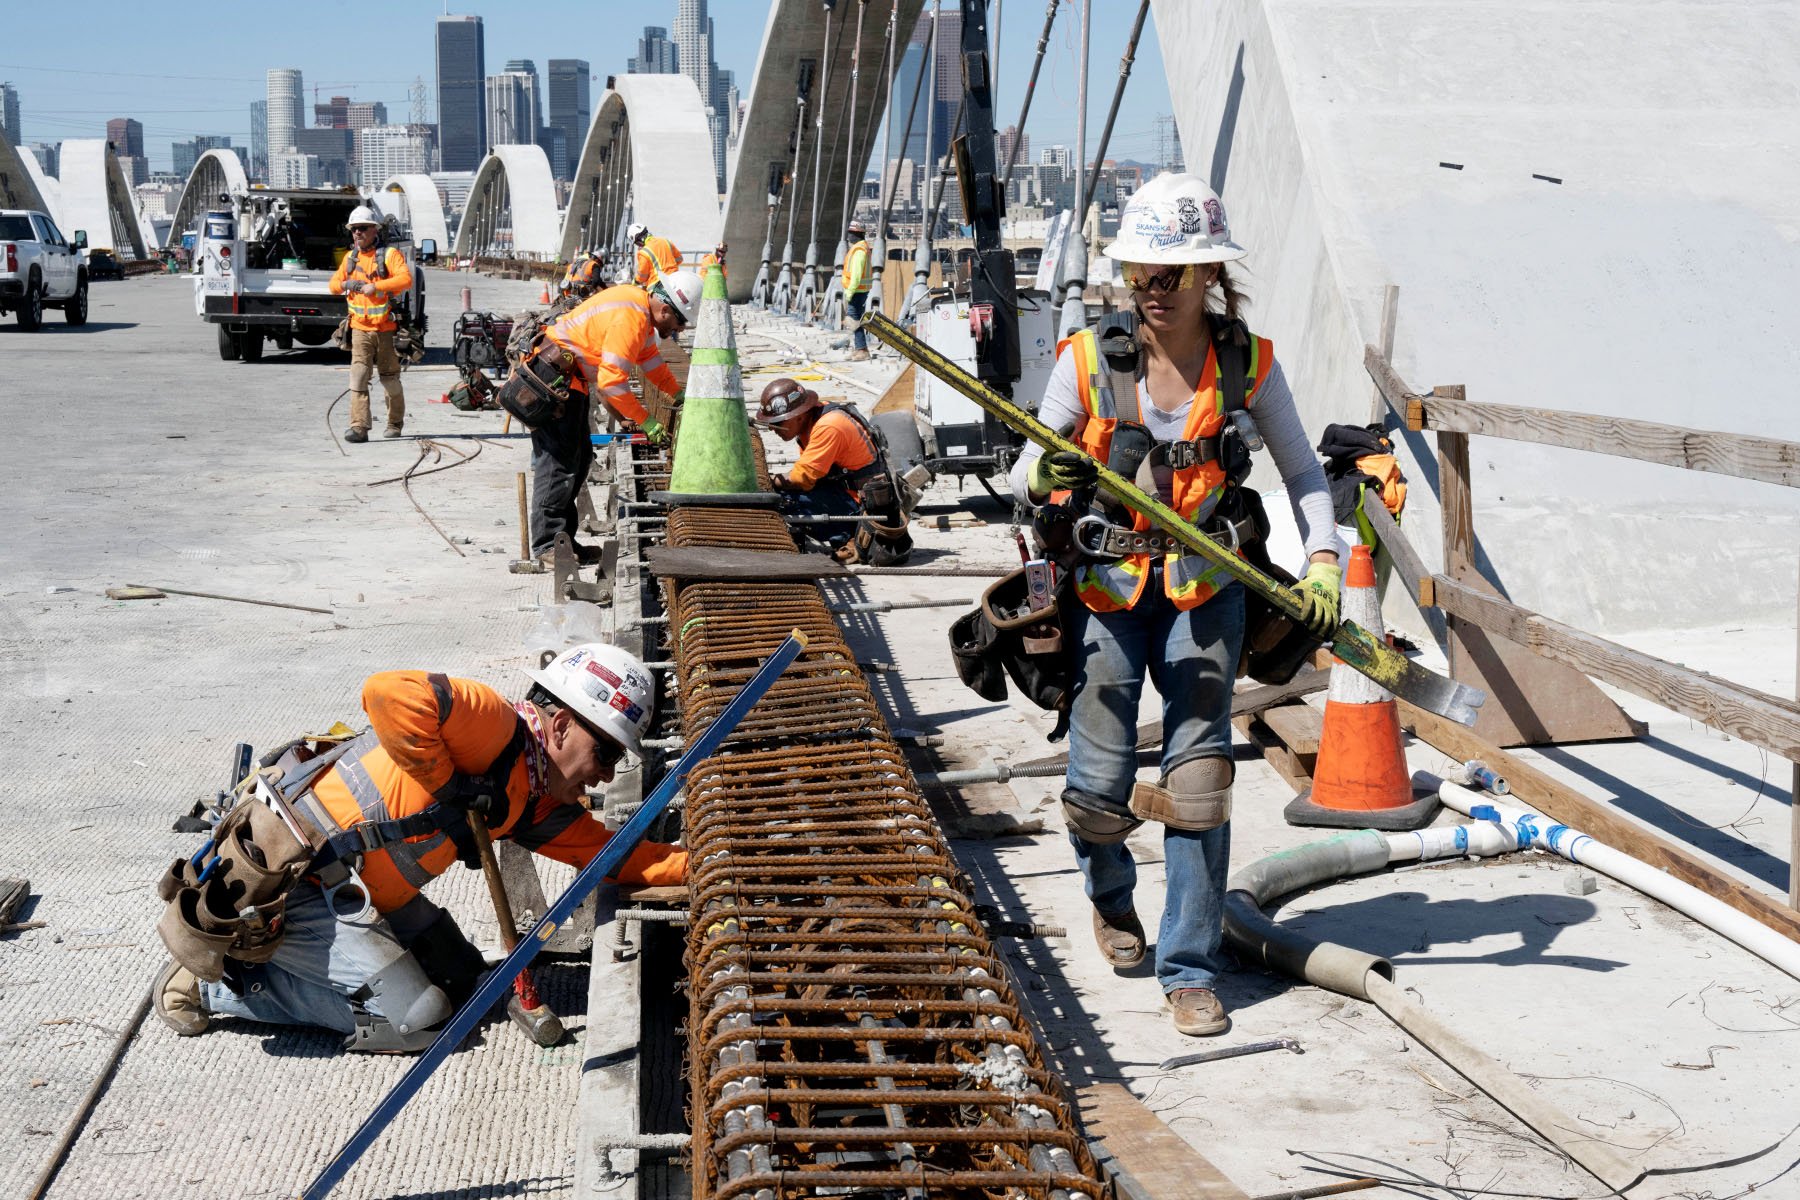 Construction workers, including a female worker, complete a rebar on the deck of a new Los Angeles bridge.